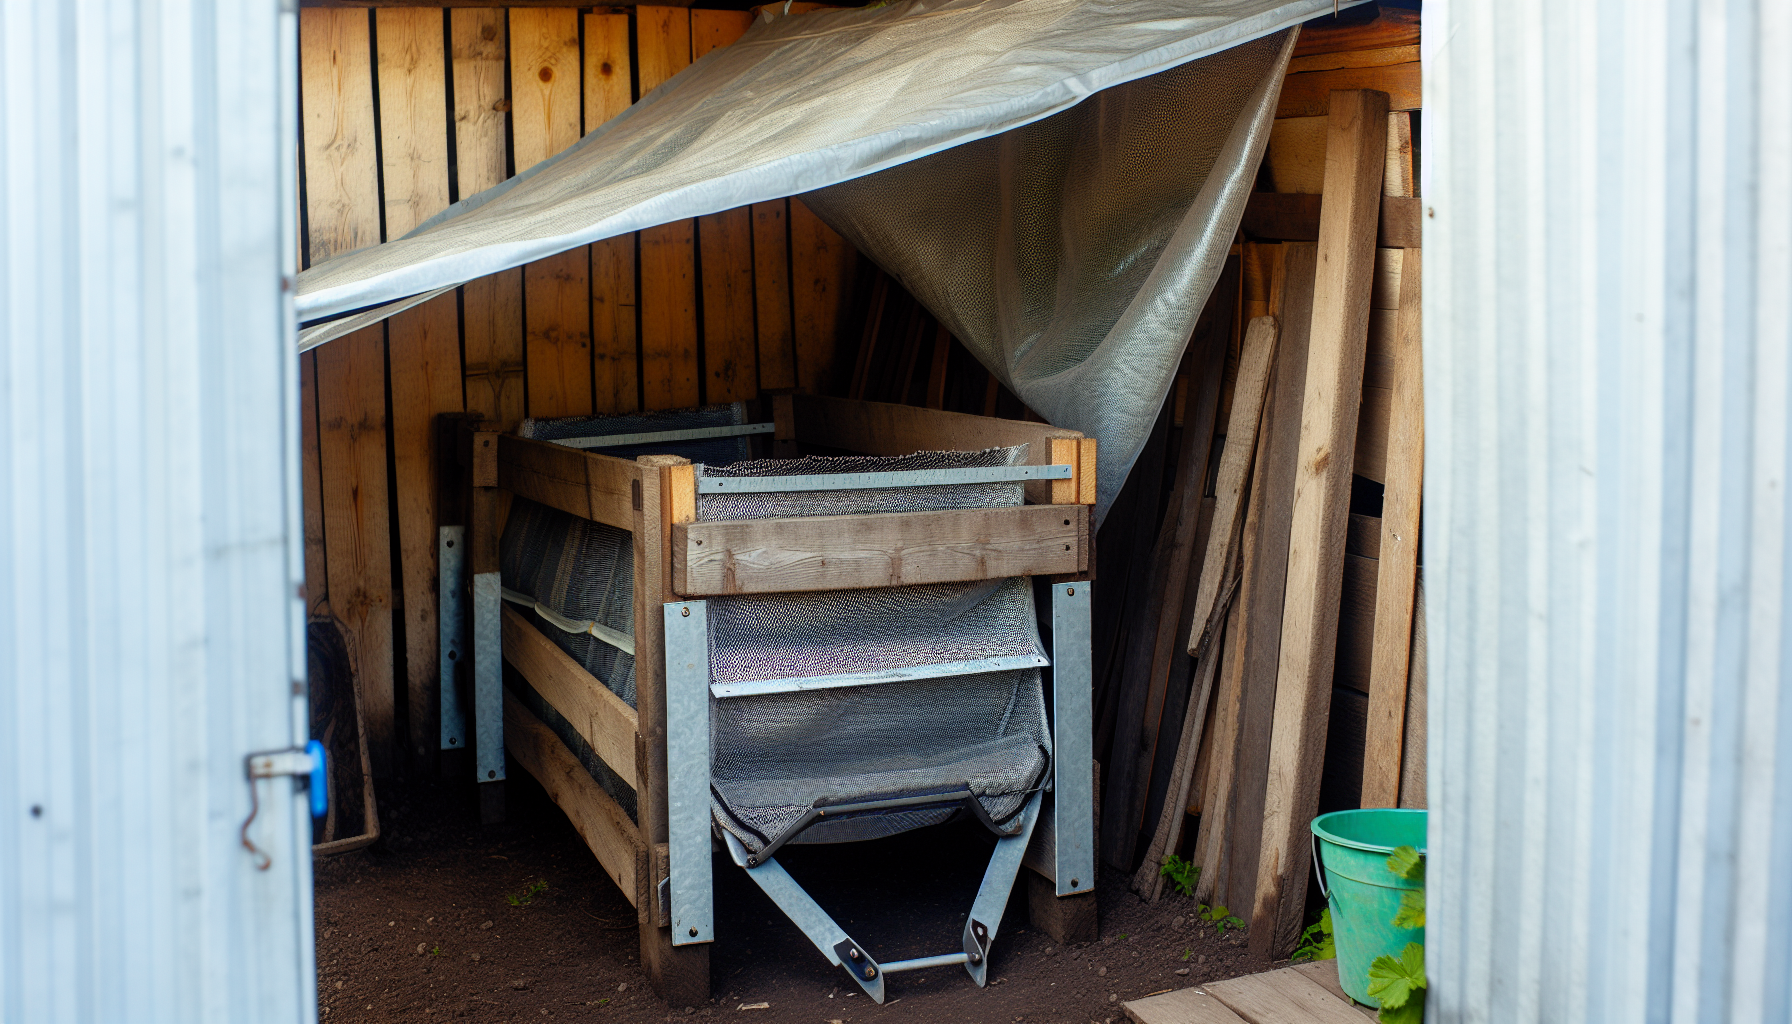 Storing a compost sifter in a covered area